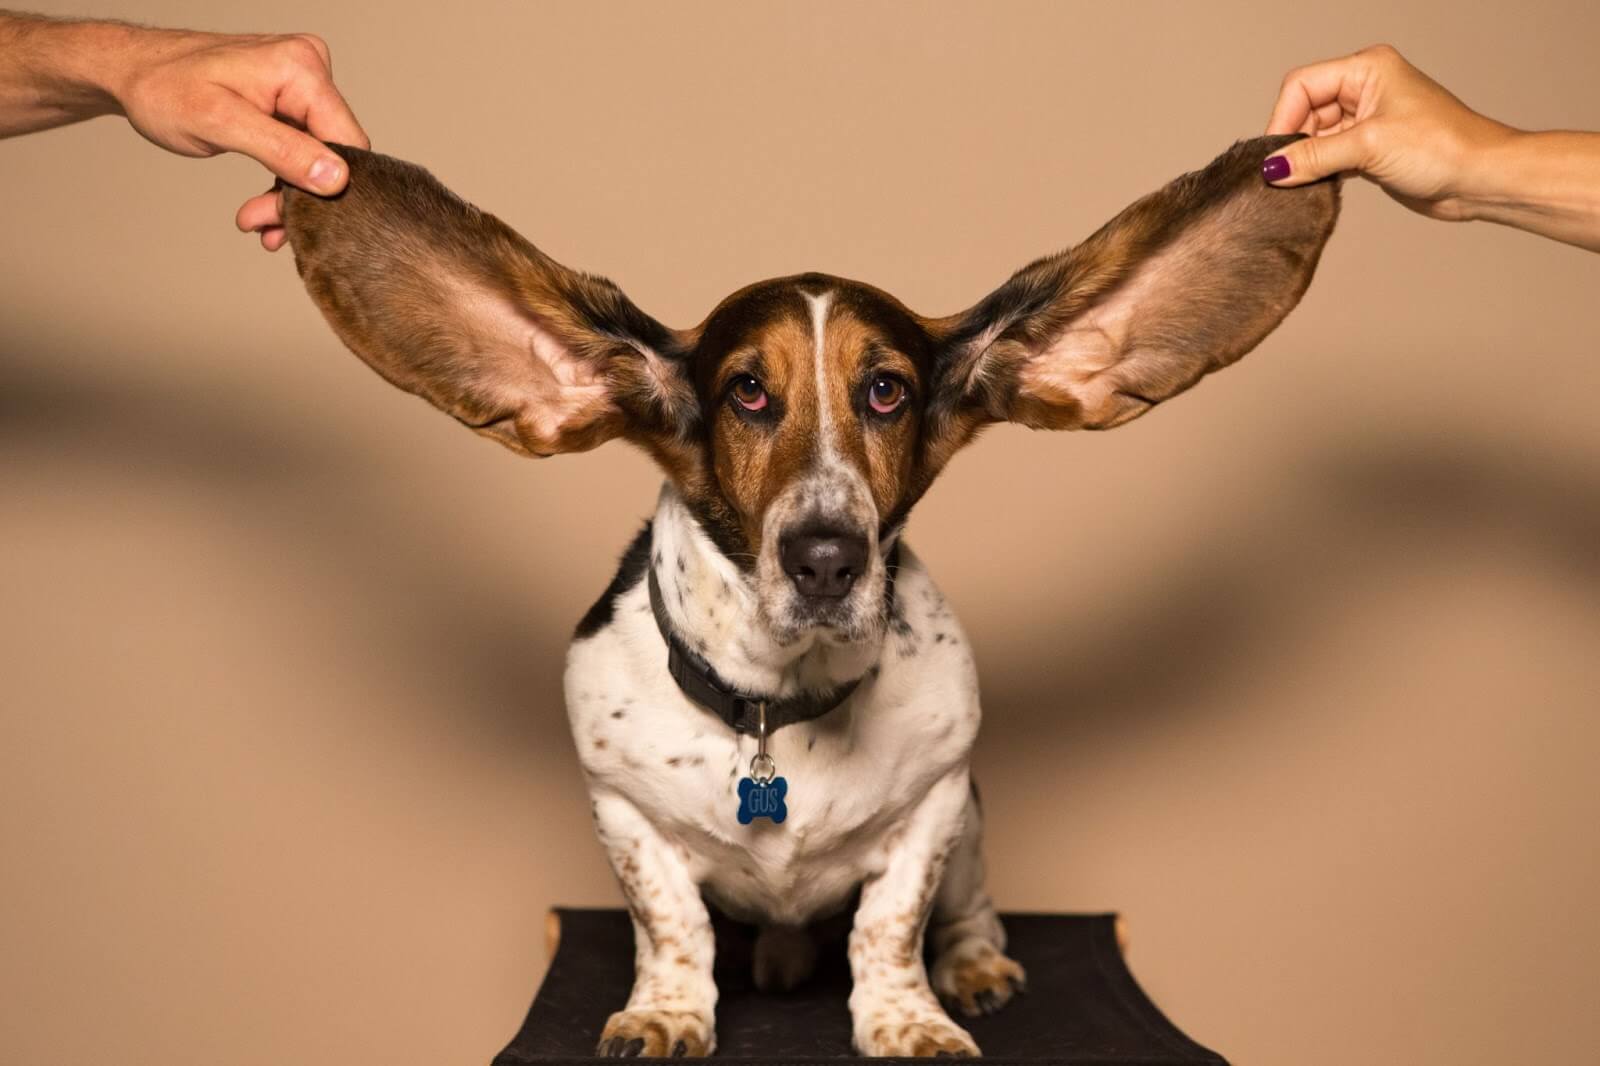 Dog Ears: Common Issues And How To Care For Them